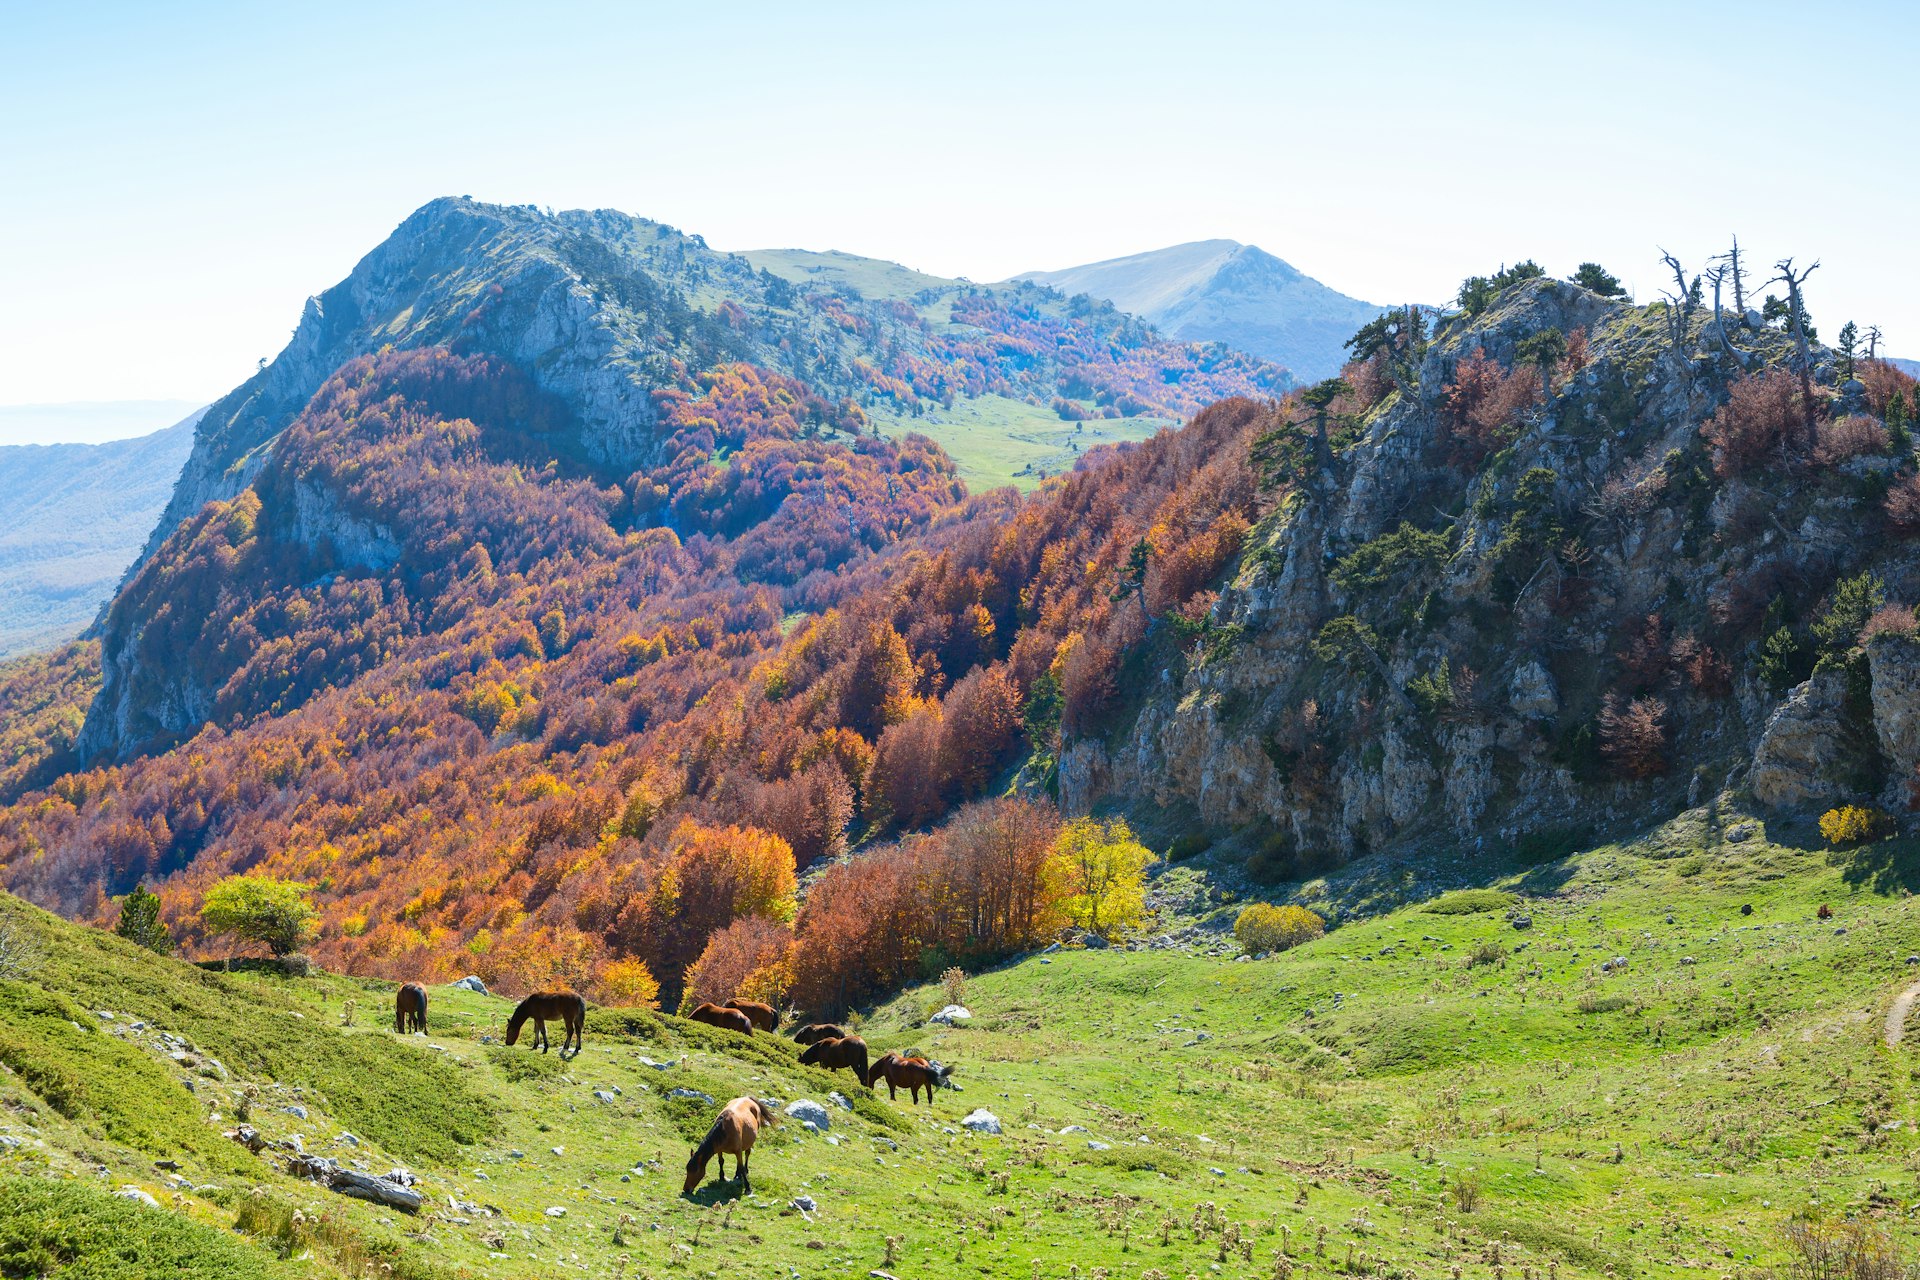 A view looking down a mountain over Pollino National Park in Italy. The hillsides are covered in forests and a number of horses graze in the foreground.